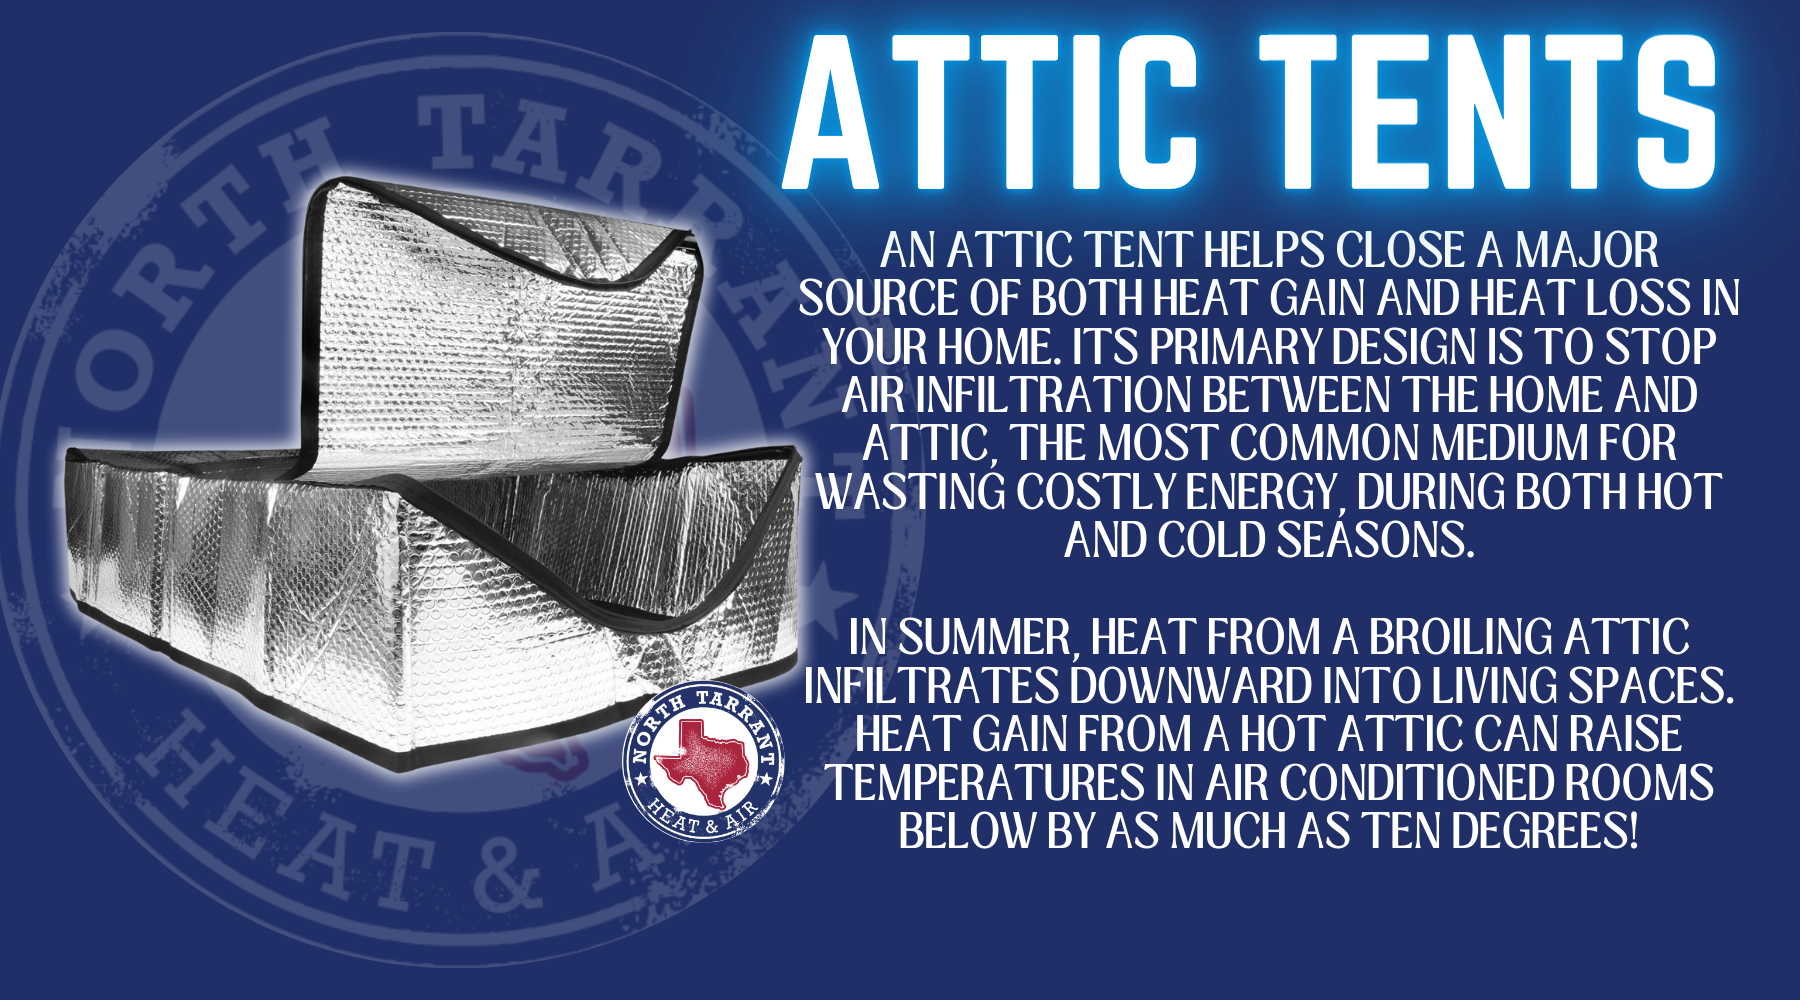 An attic tent helps close a major source of both heat gain and heat loss in your home. Its primary design is to stop air infiltration between the home and attic, the most common medium for wasting costly energy, during both hot and cold seasons. In summer, heat from a broiling attic infiltrates downward into living spaces. Heat gain from a hot attic can raise temperatures in air conditioned rooms below by as much as ten degrees!